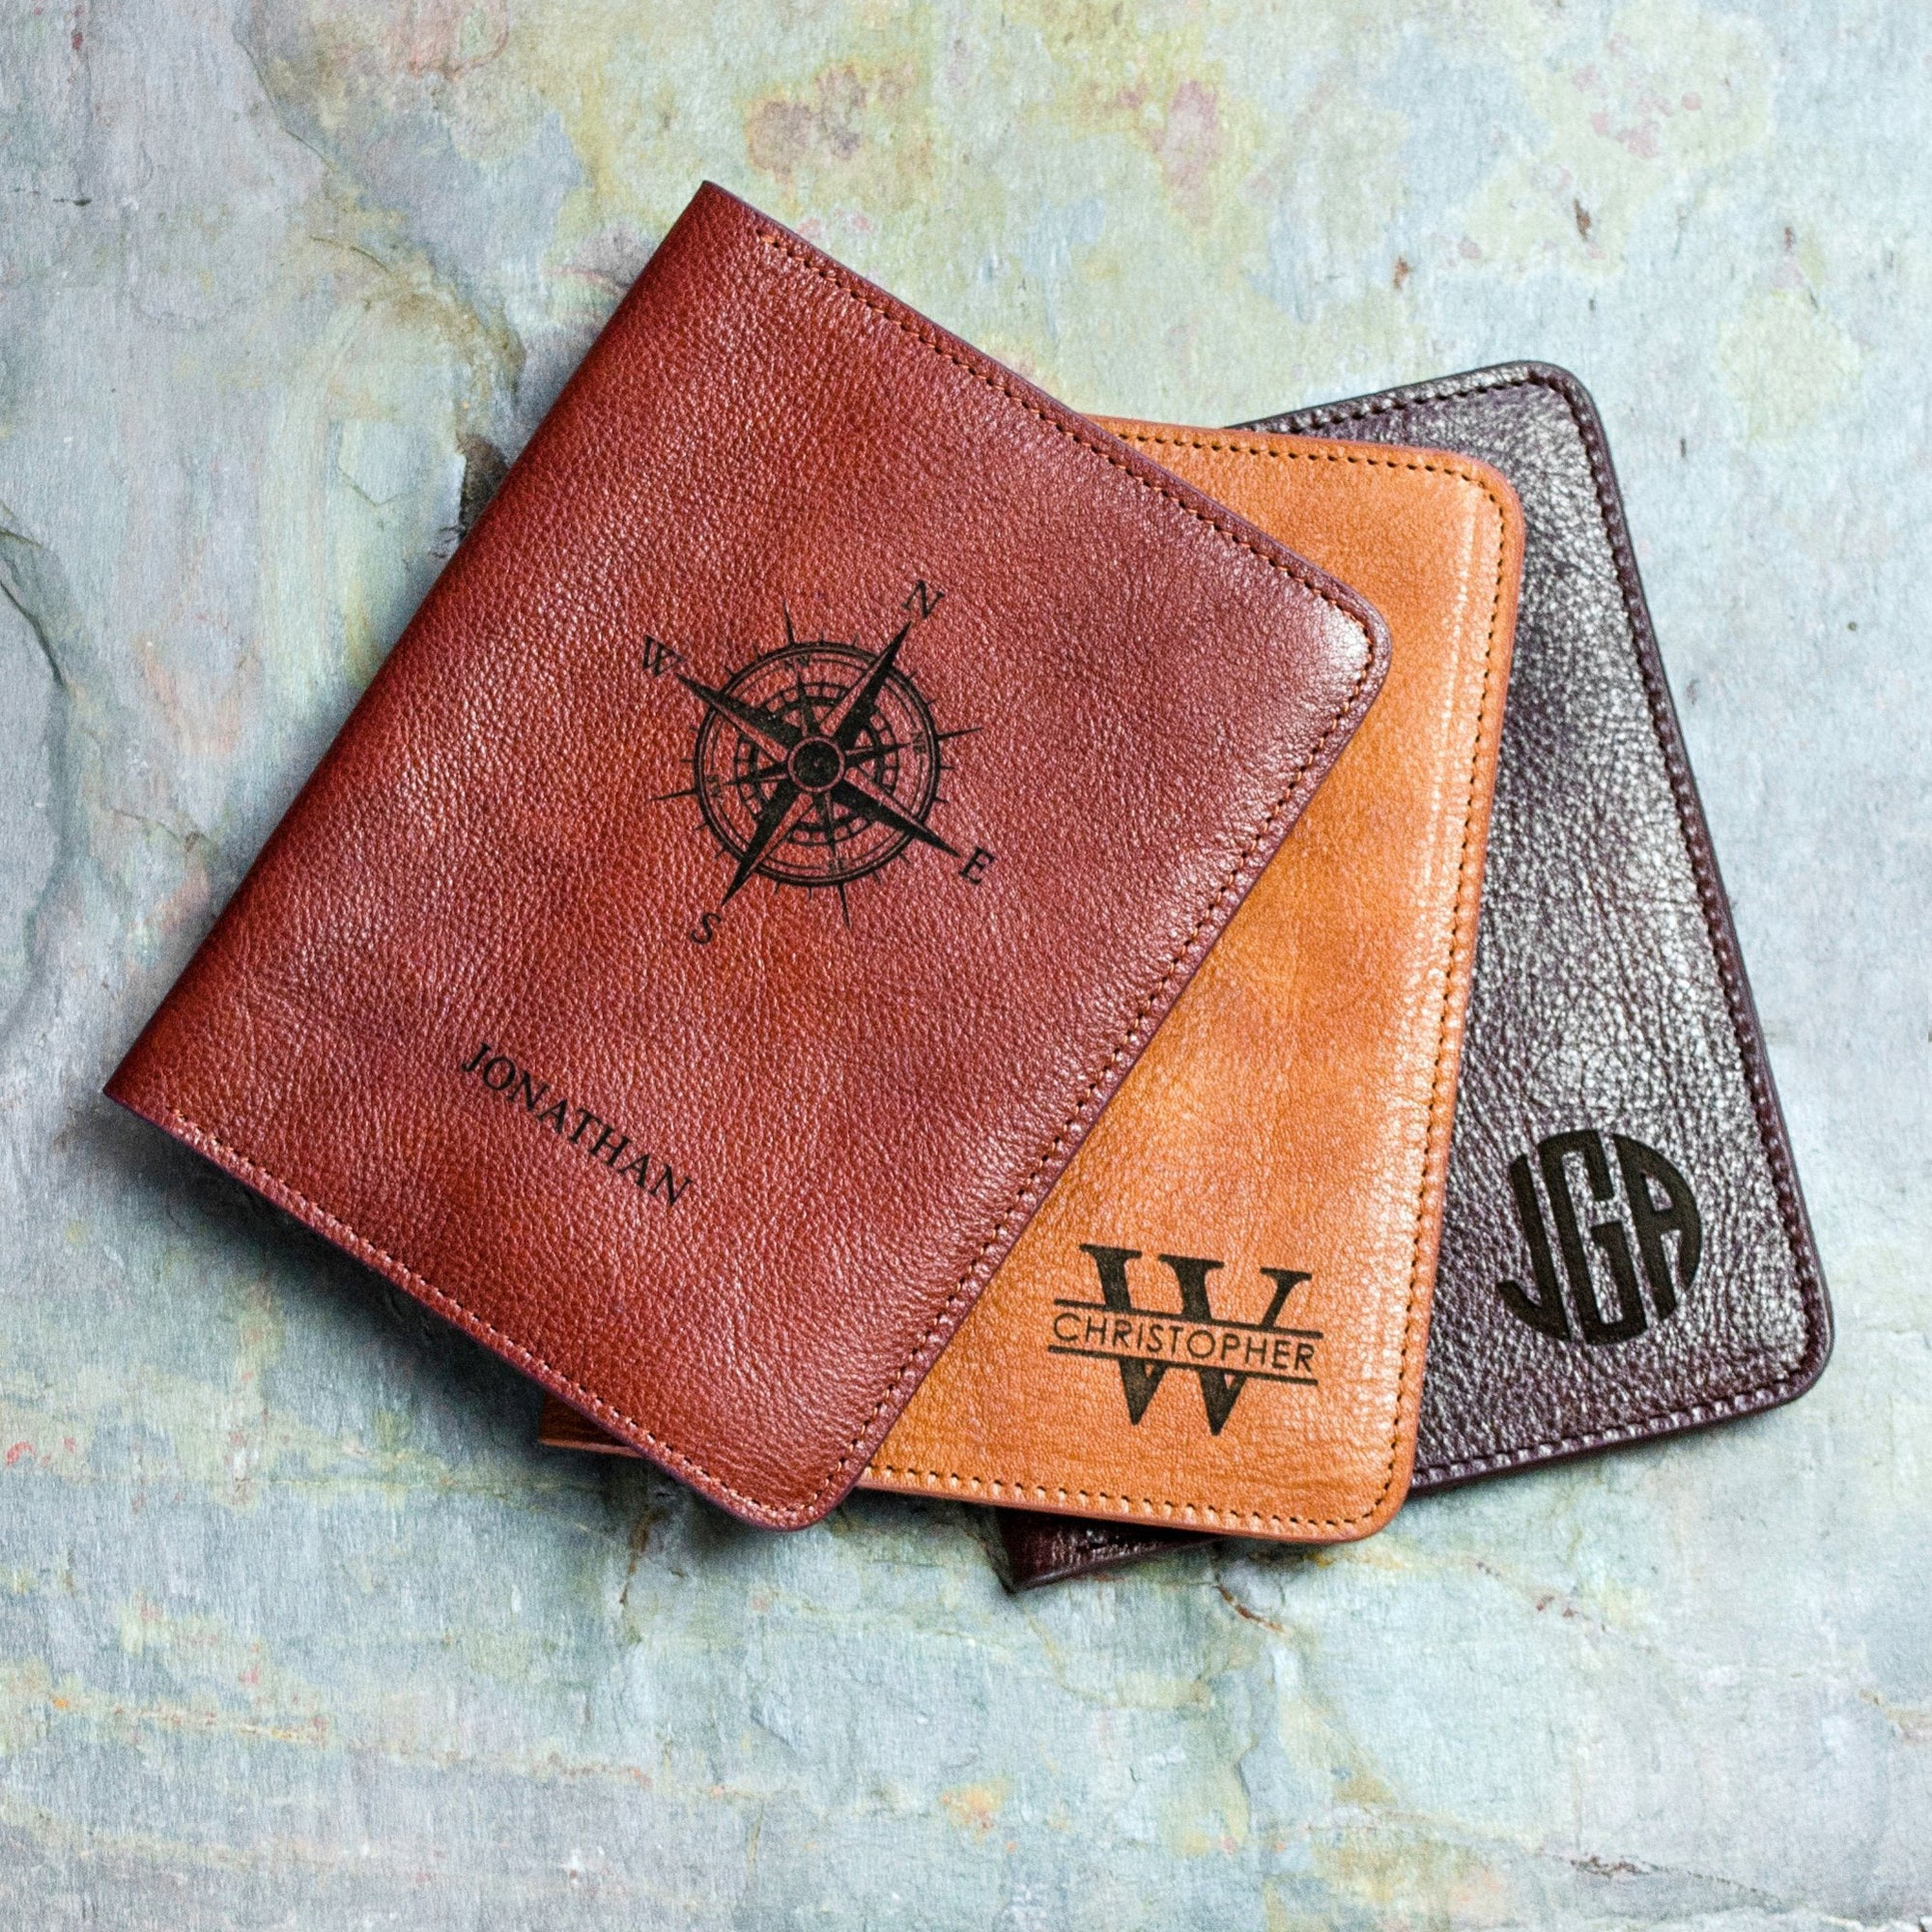 Monogram Leather Keychain Wallet - Custom Mom Wallet - Customized - Personalized Credit Card Holder- Emboss - Gift Wife Present